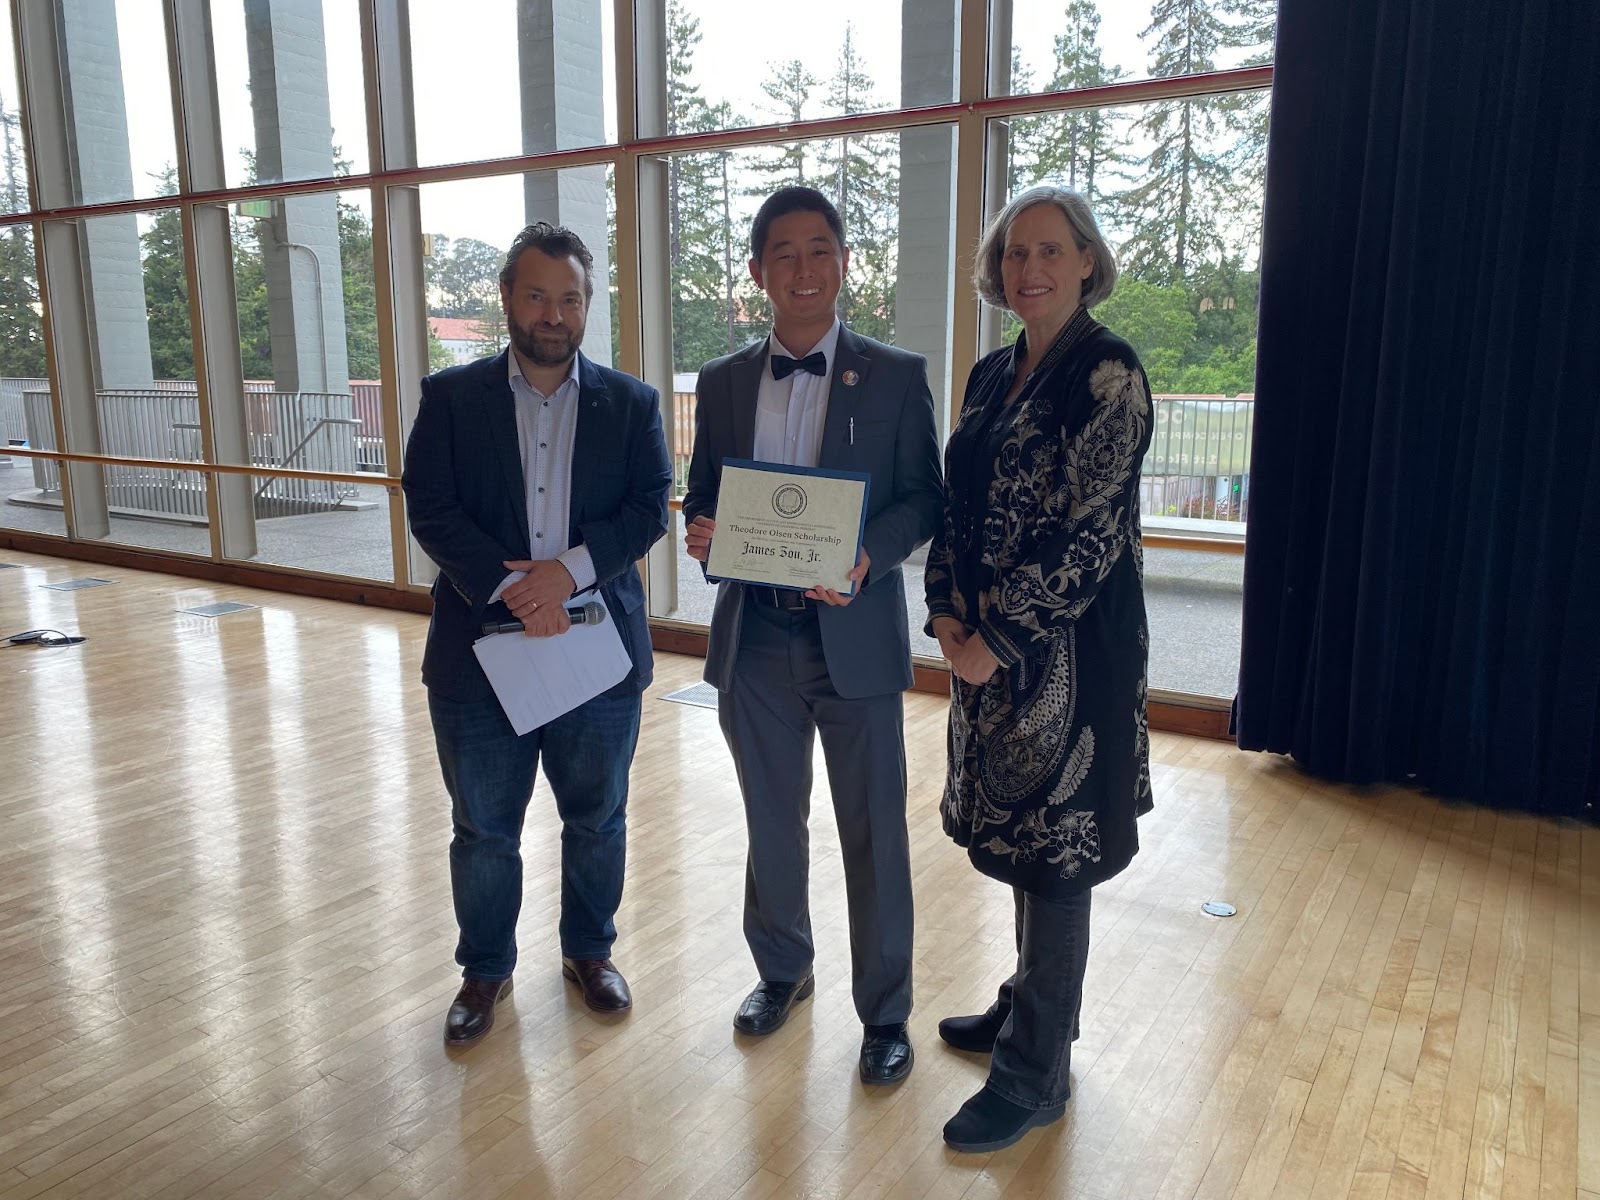 Chair Joan Walker (far right) and CEE Professor Dimitrios Konstantinidis (far left) present James Zou with The Theodore Olsen Scholarship. (Photo Credit: Erin Leigh Inama).